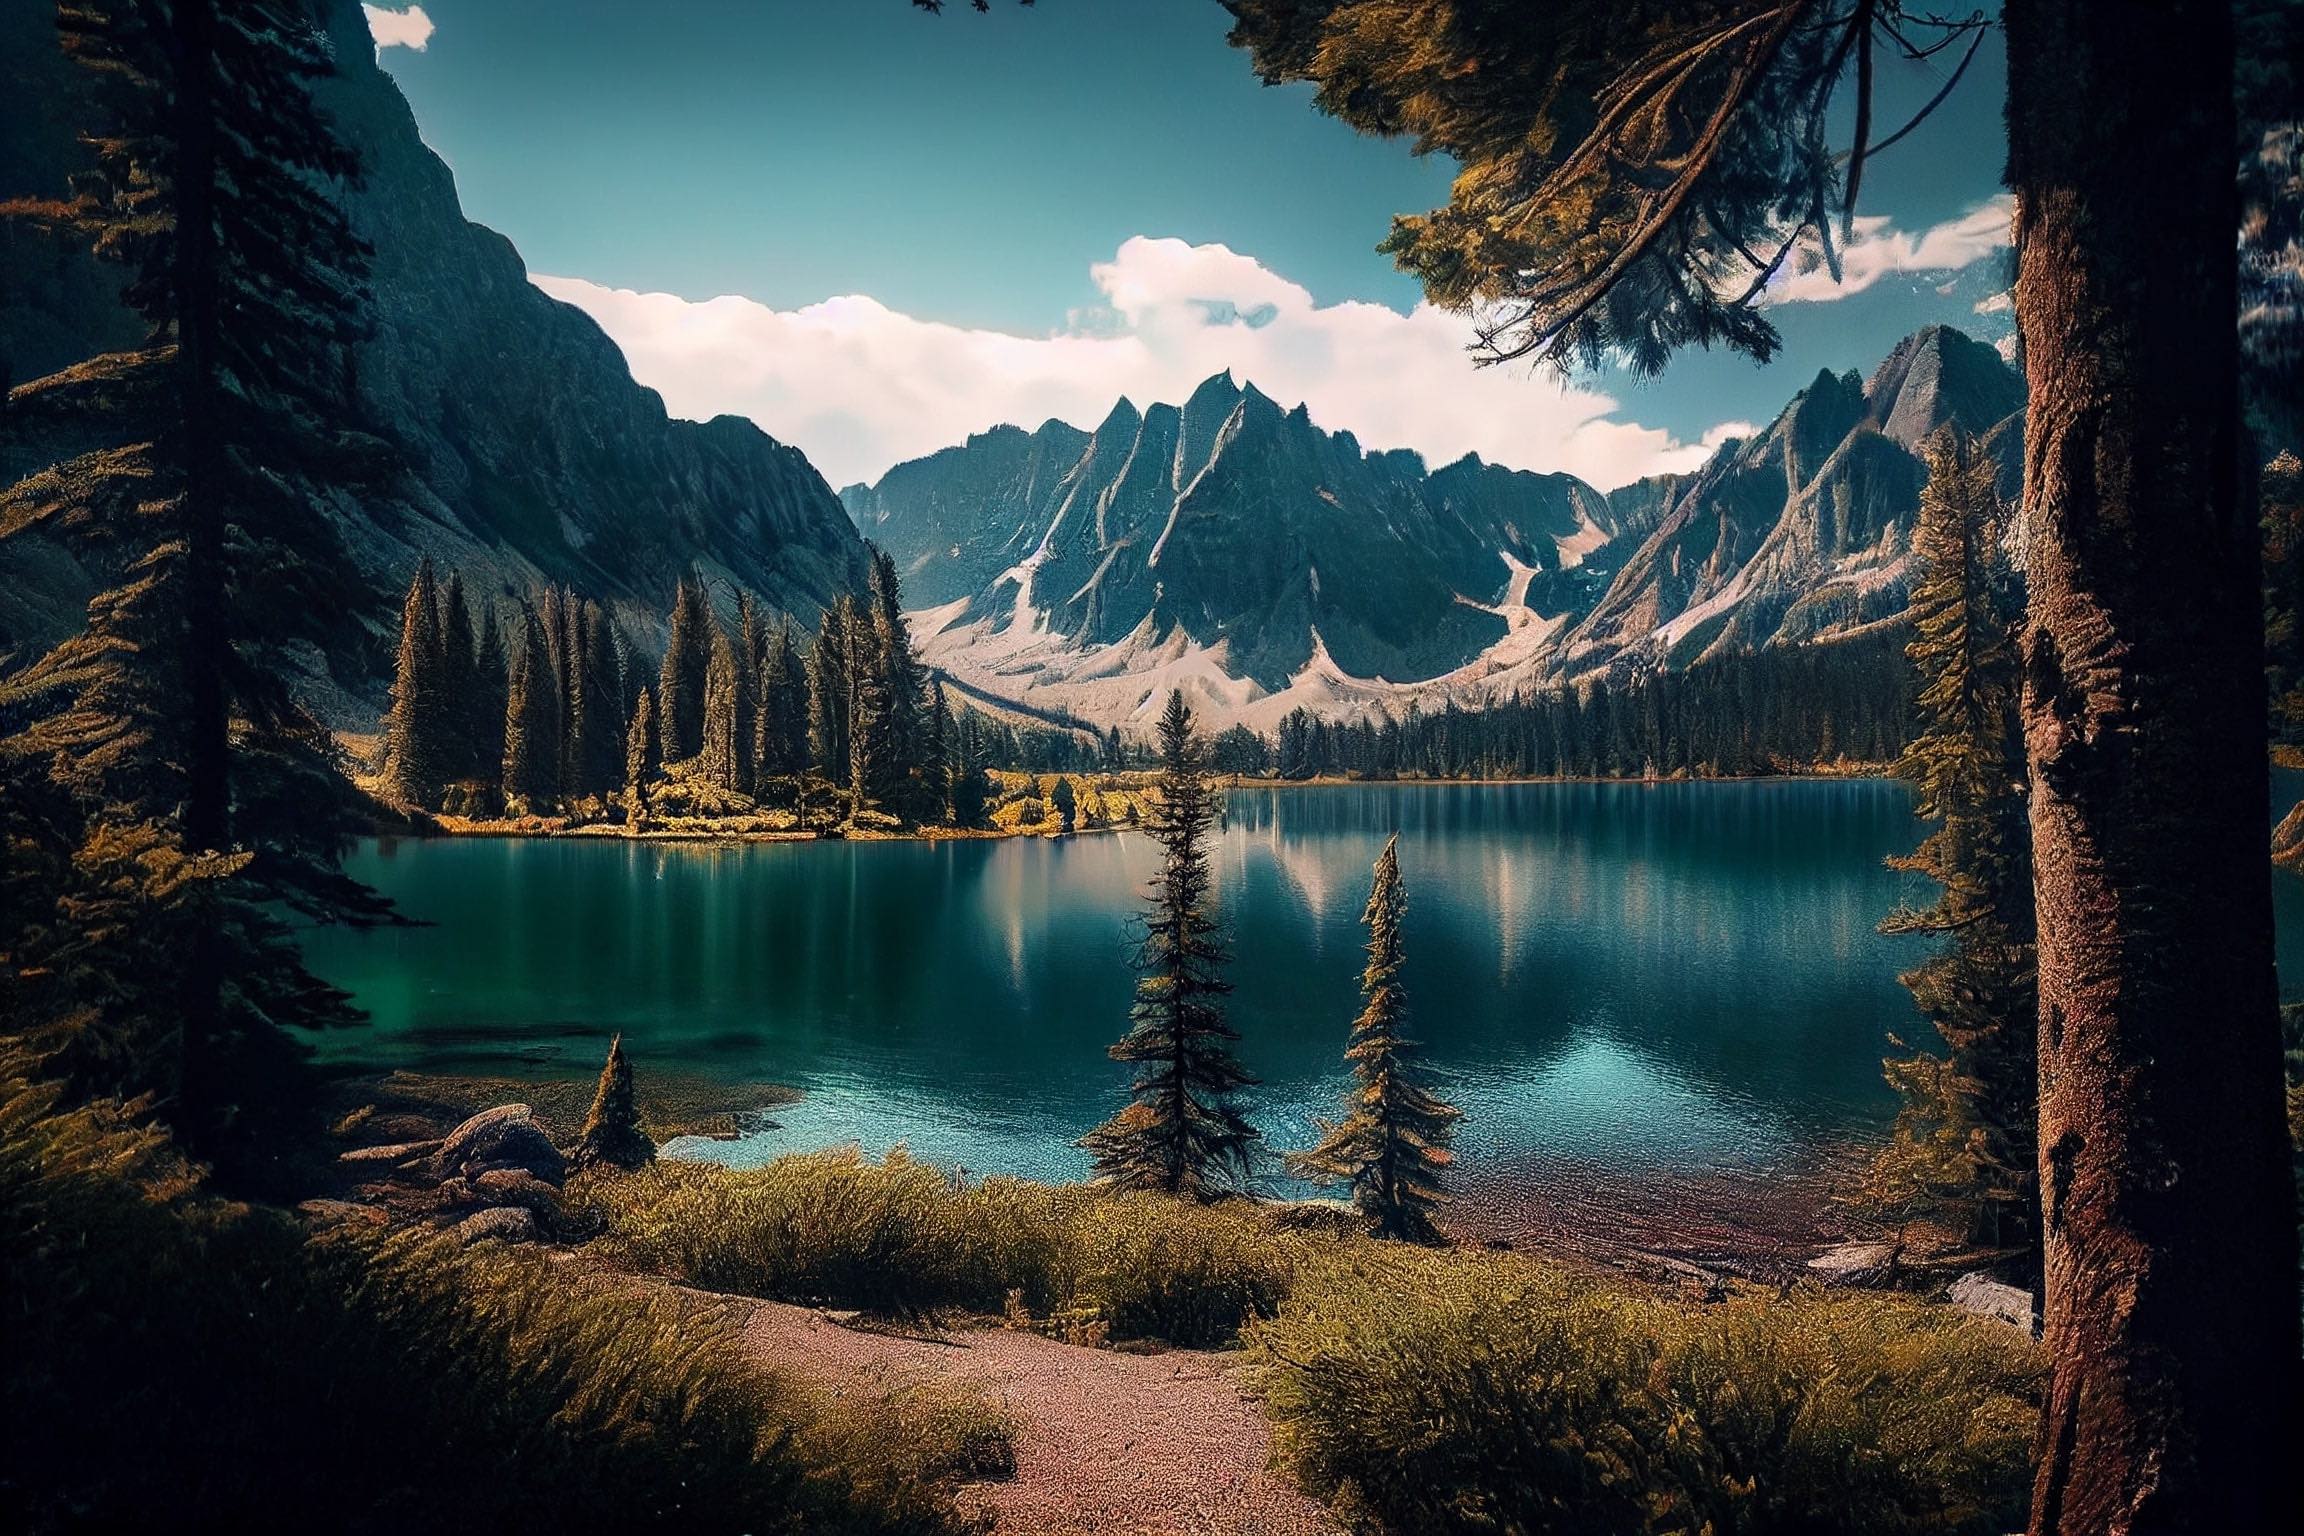 Scenic view of a mountain lake surrounded by pine trees.